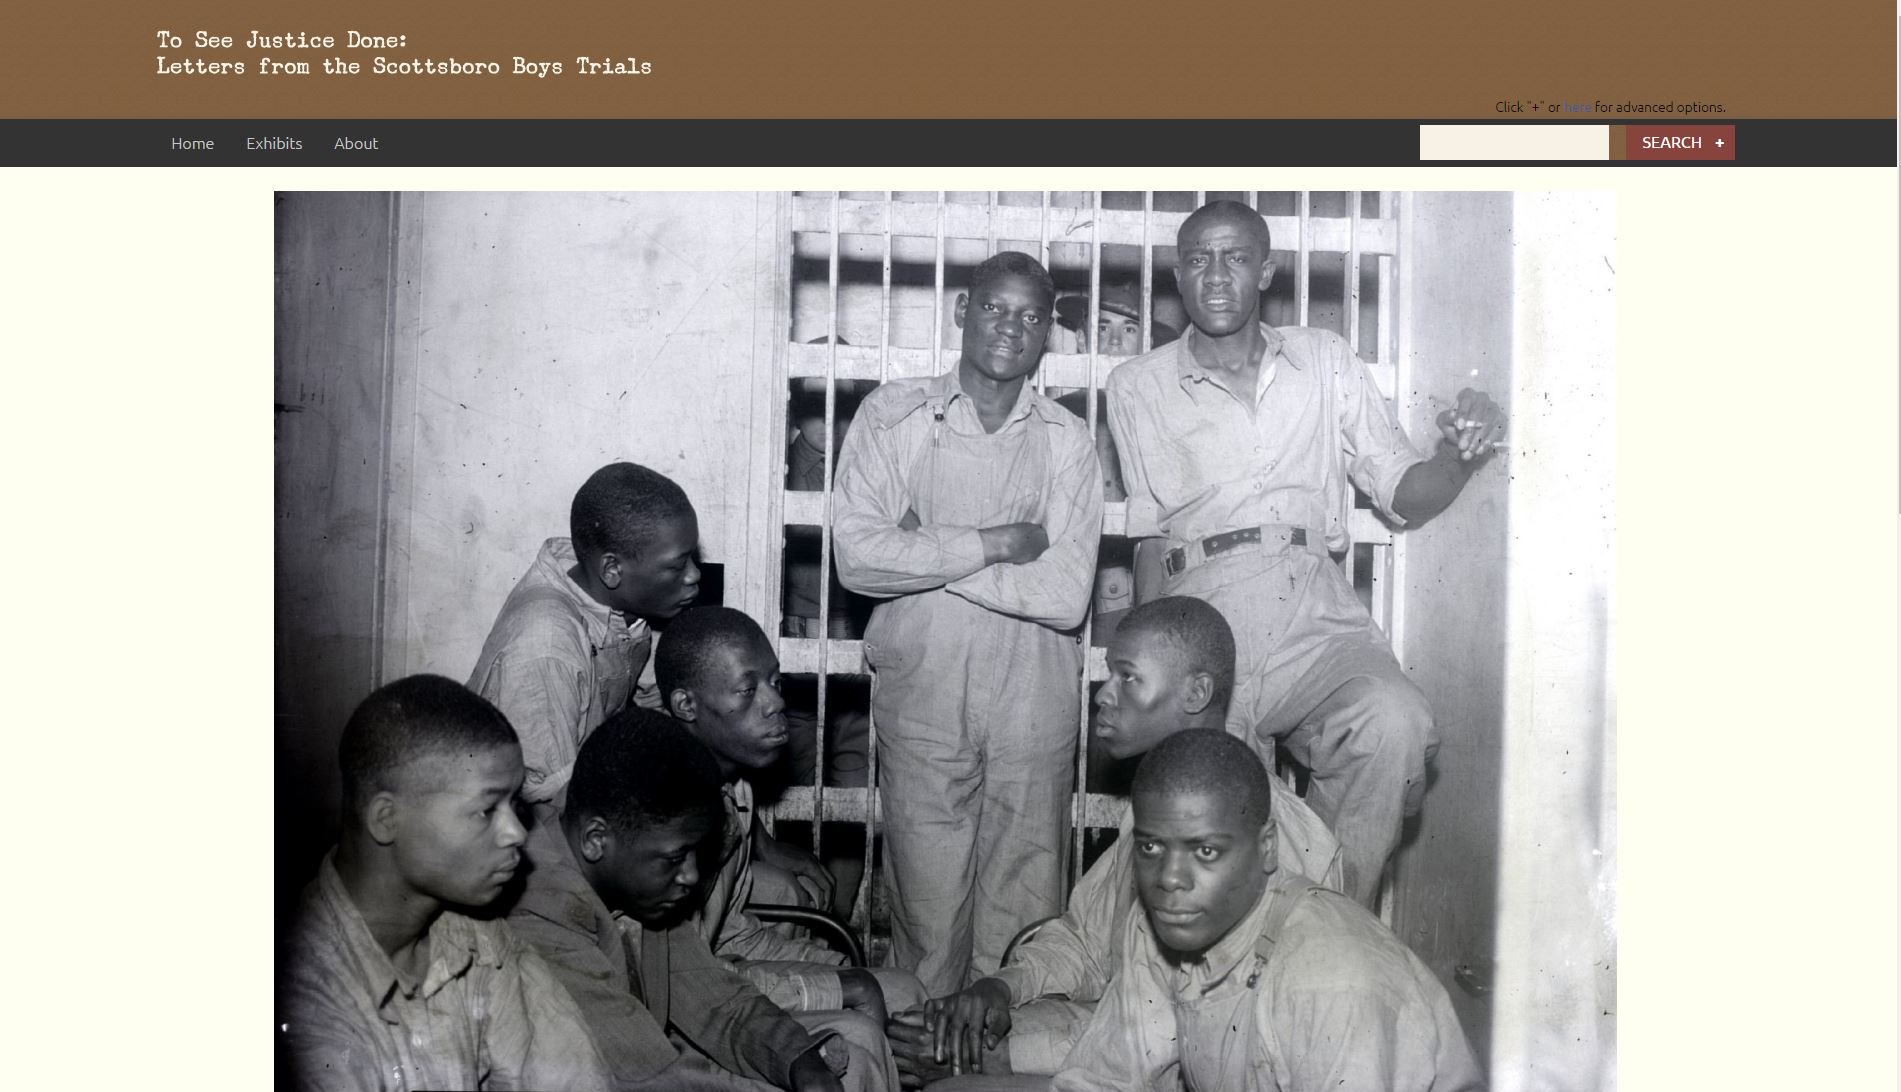 The homepage of the new online database “‘To See Justice Done’: Letters from the Scottsboro Trials.”